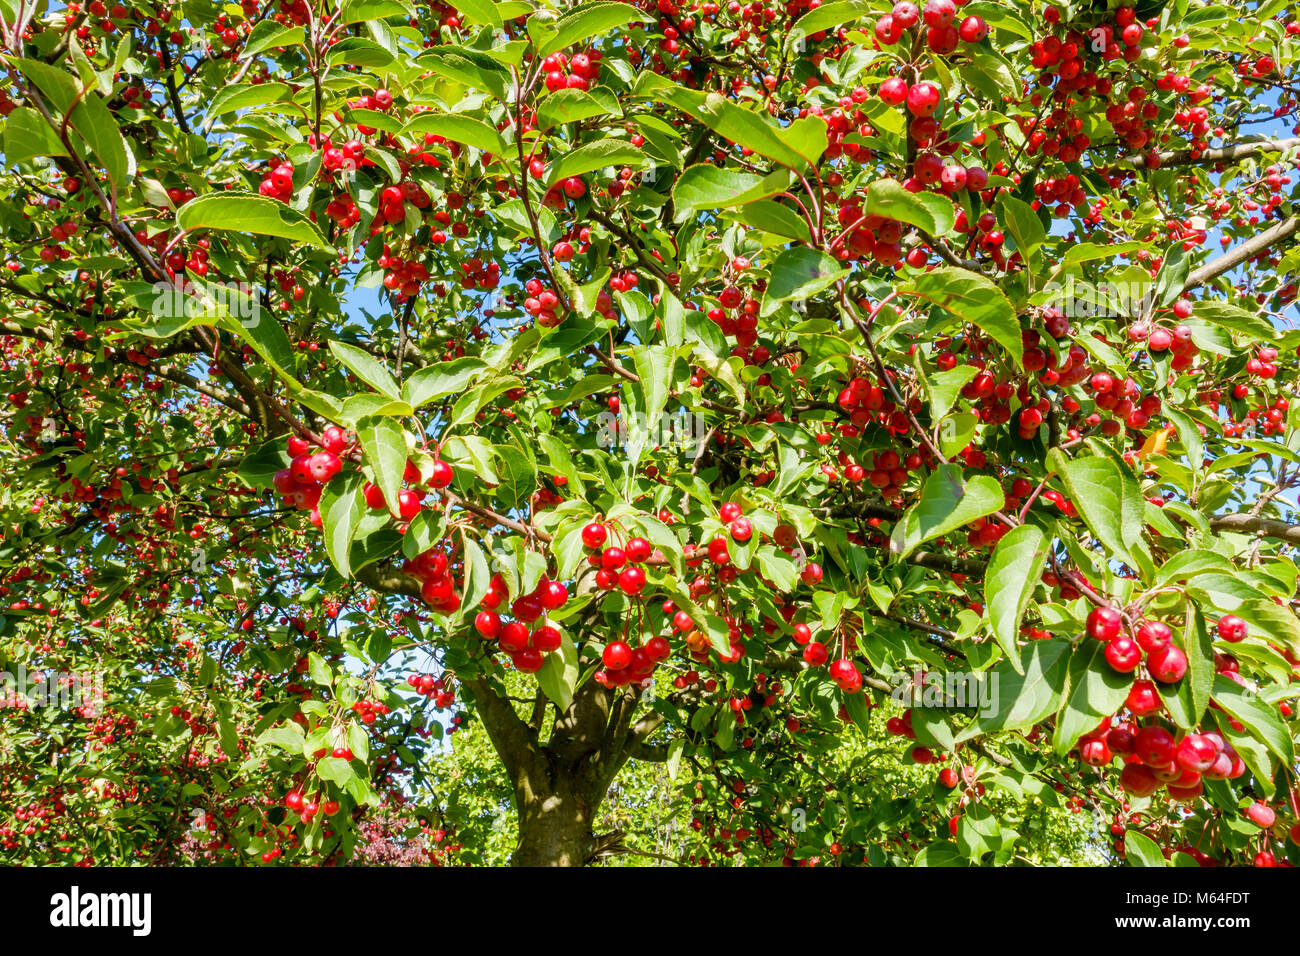 Crabapple trees with red crab apples illuminated by sunshine against blue sky. Stock Photo